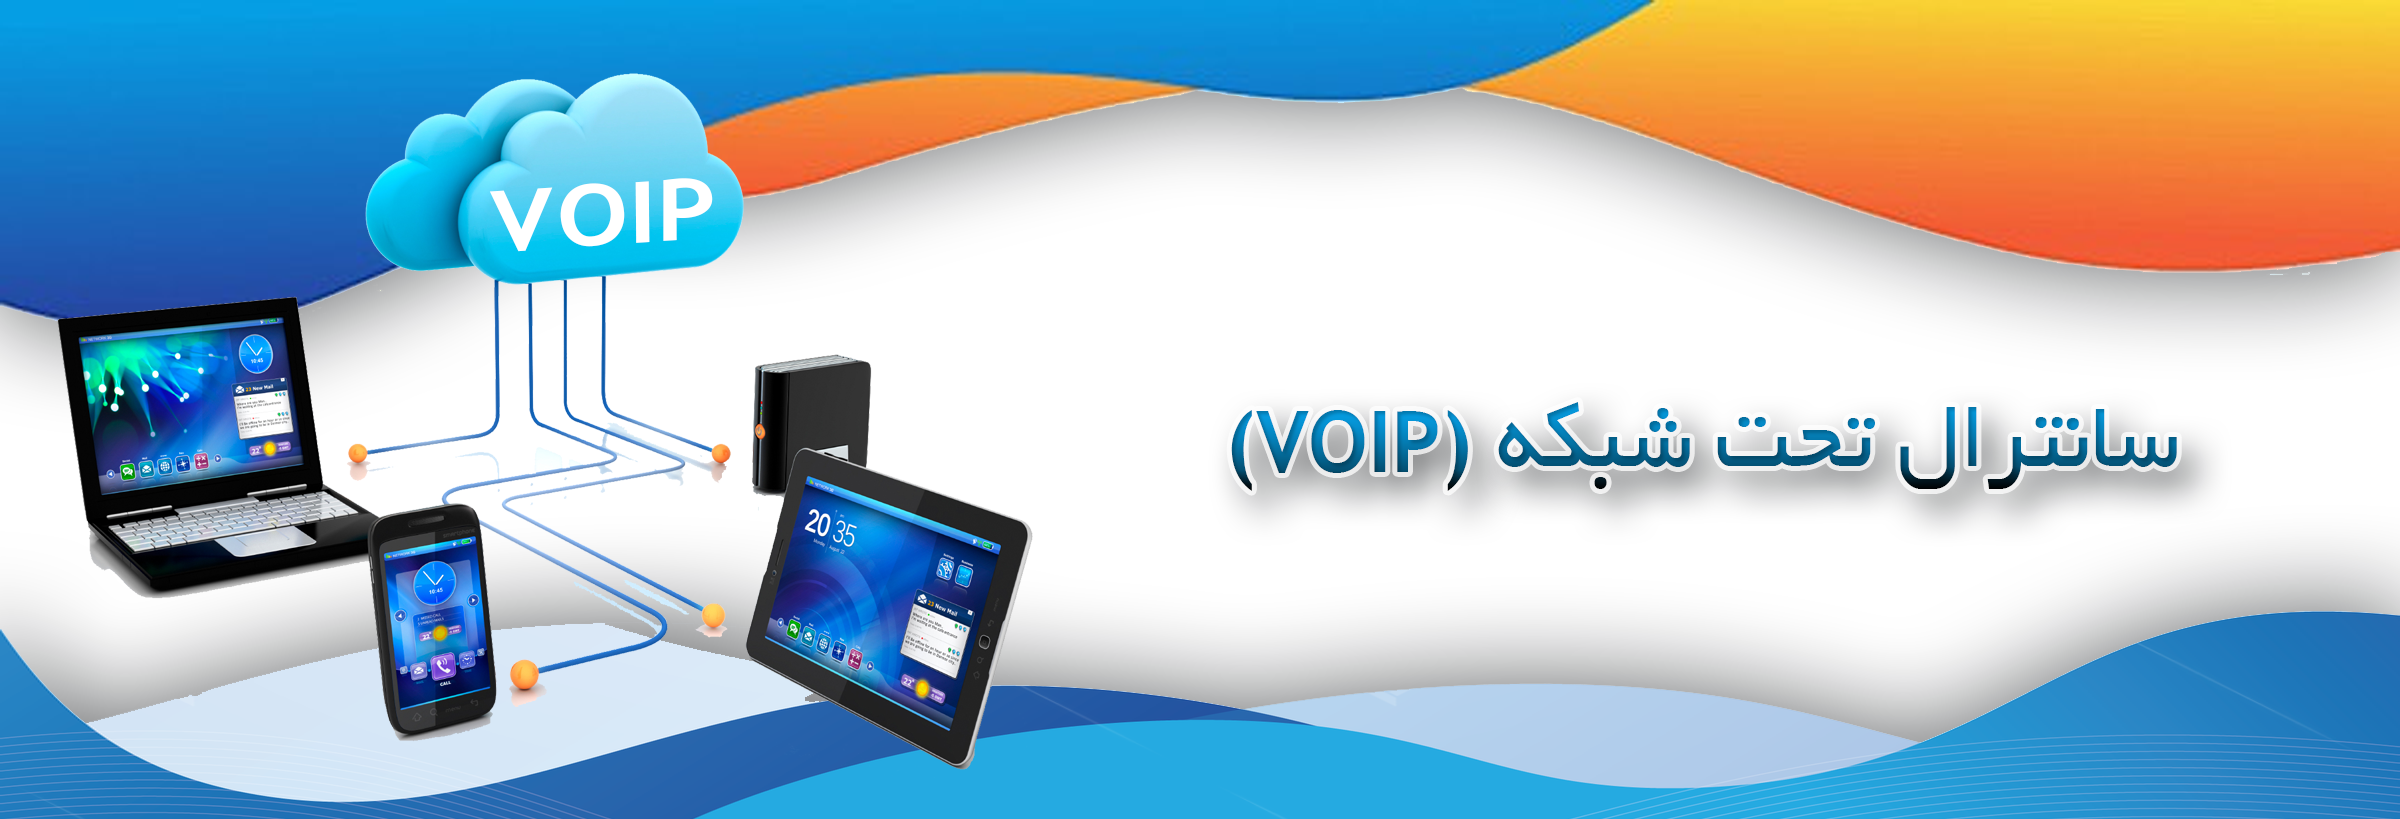 4-voip